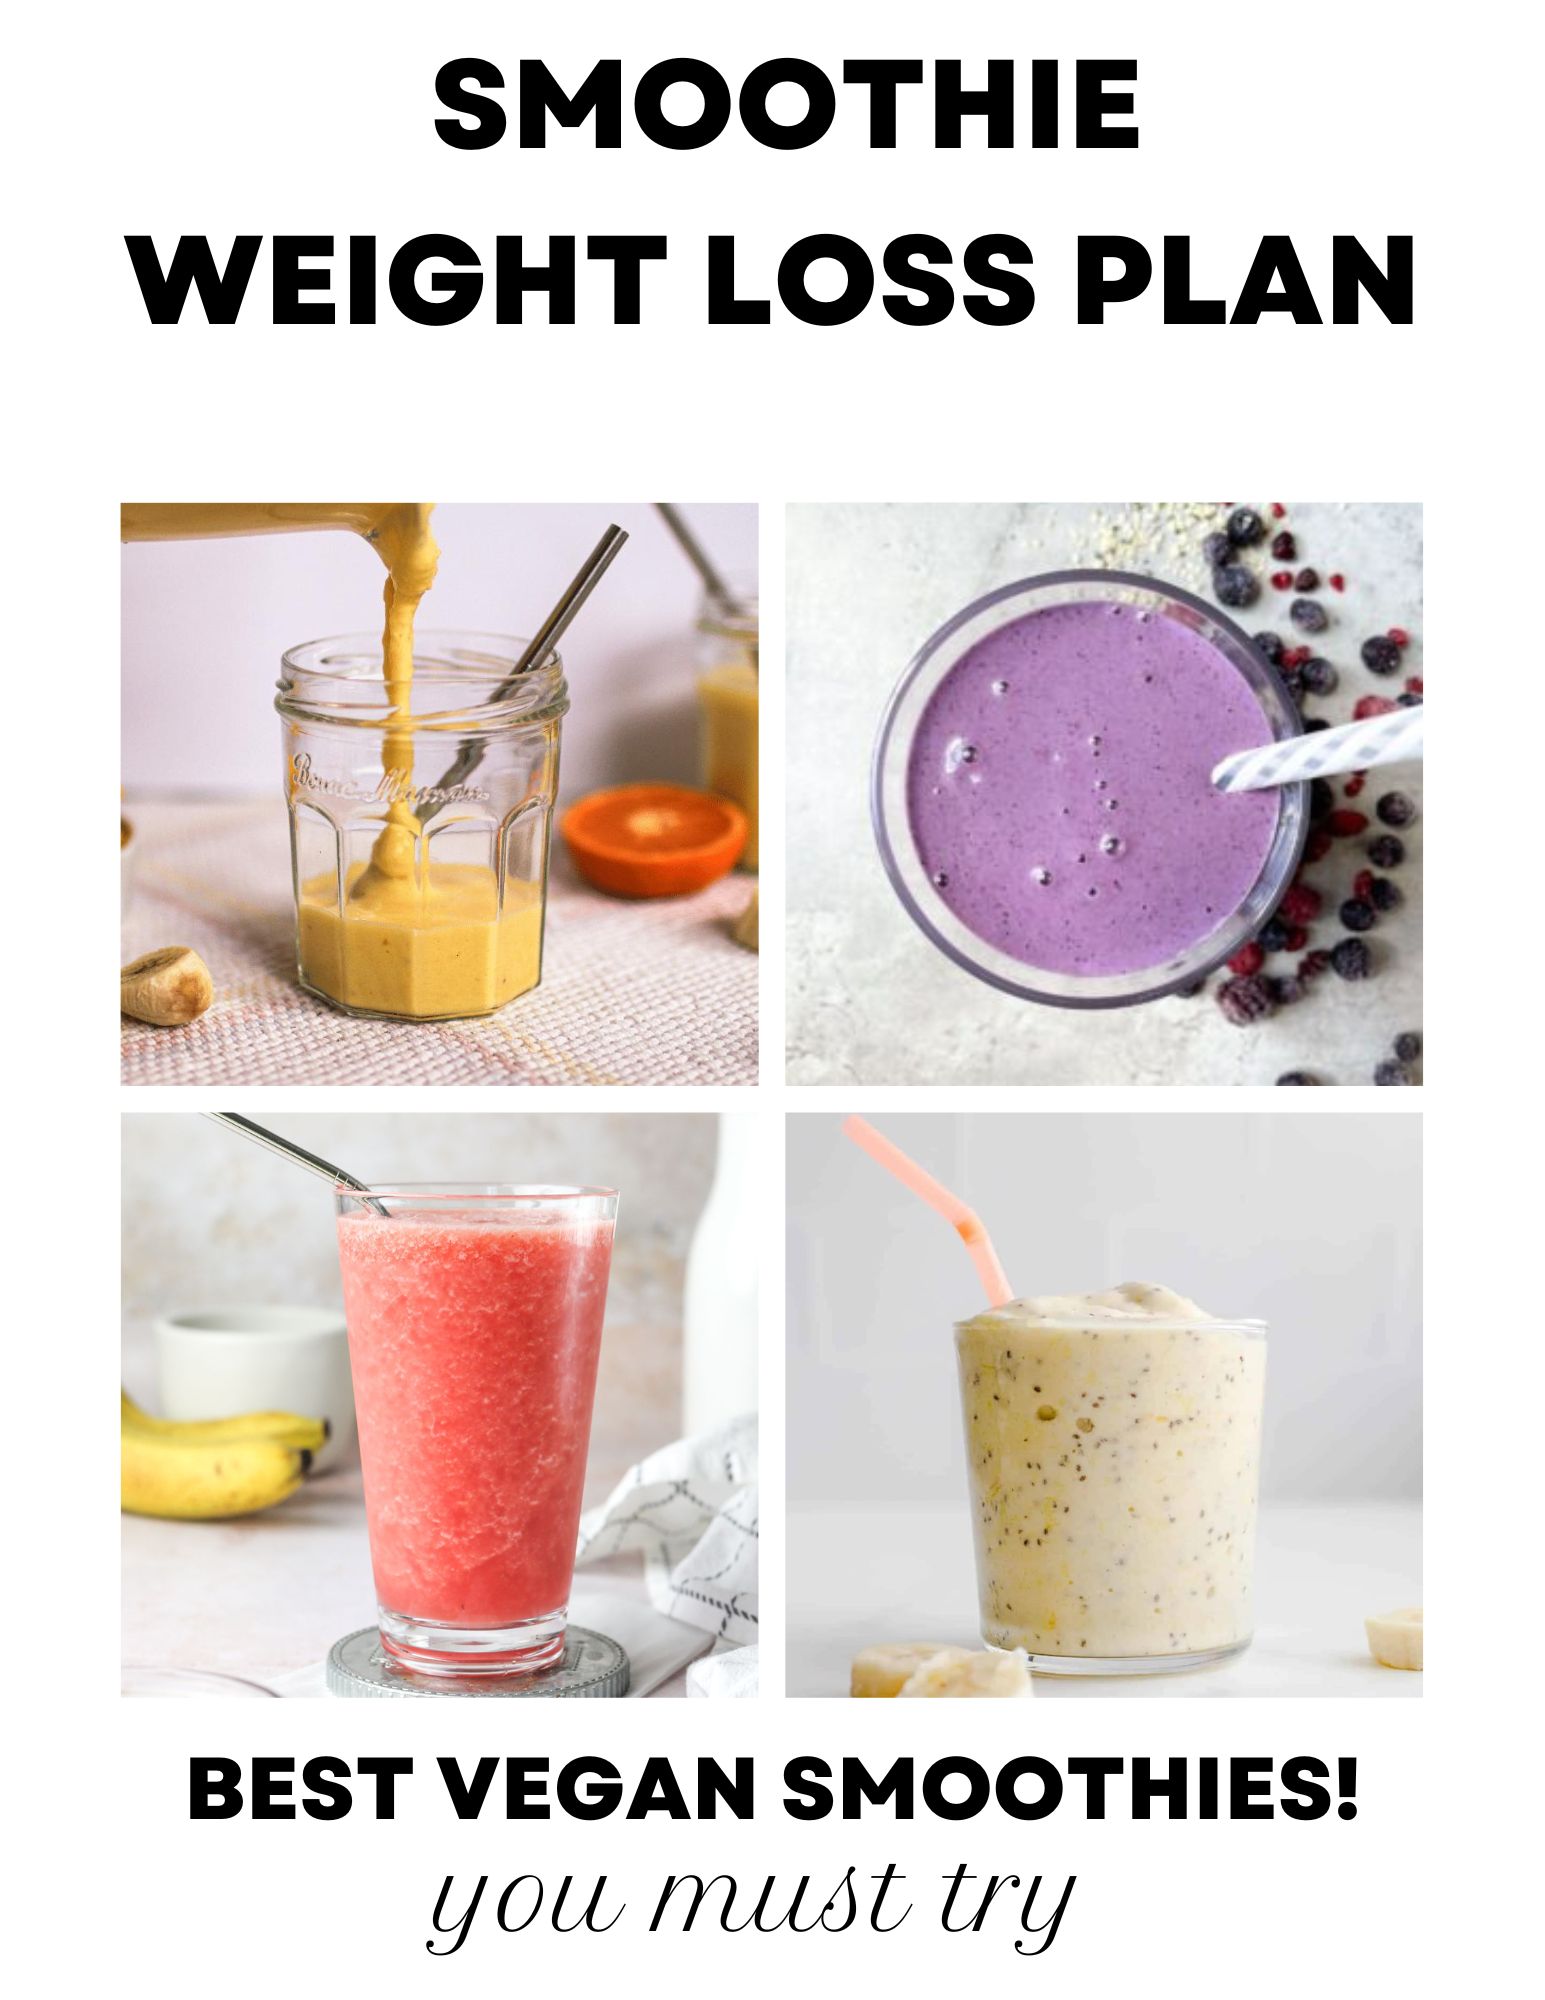 Smoothie weight loss plan pinterest pin